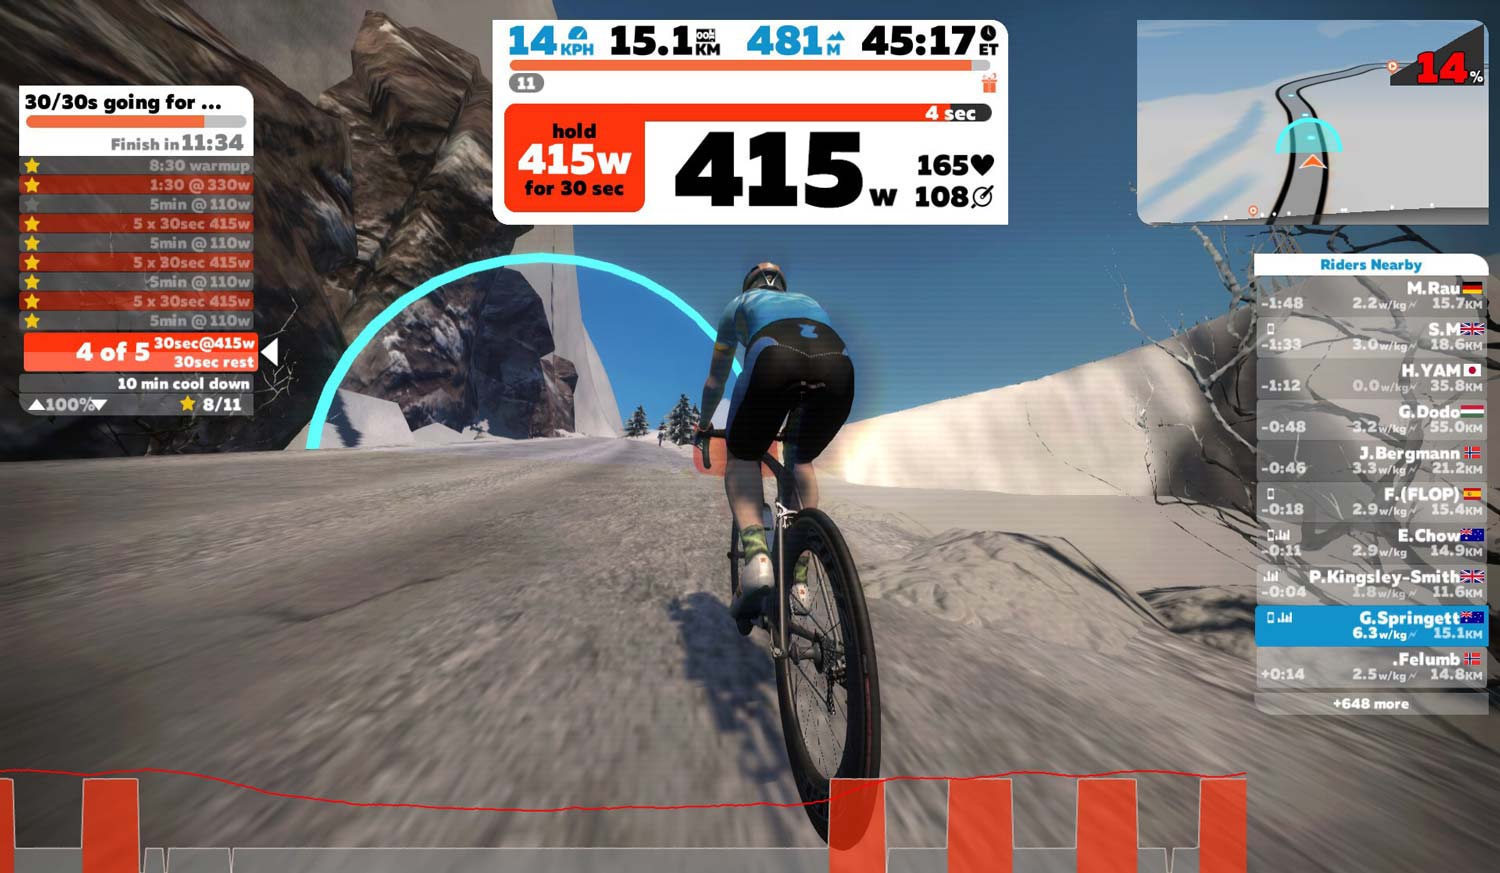 Comment: “A new habit, Zwifting” - Ride Media